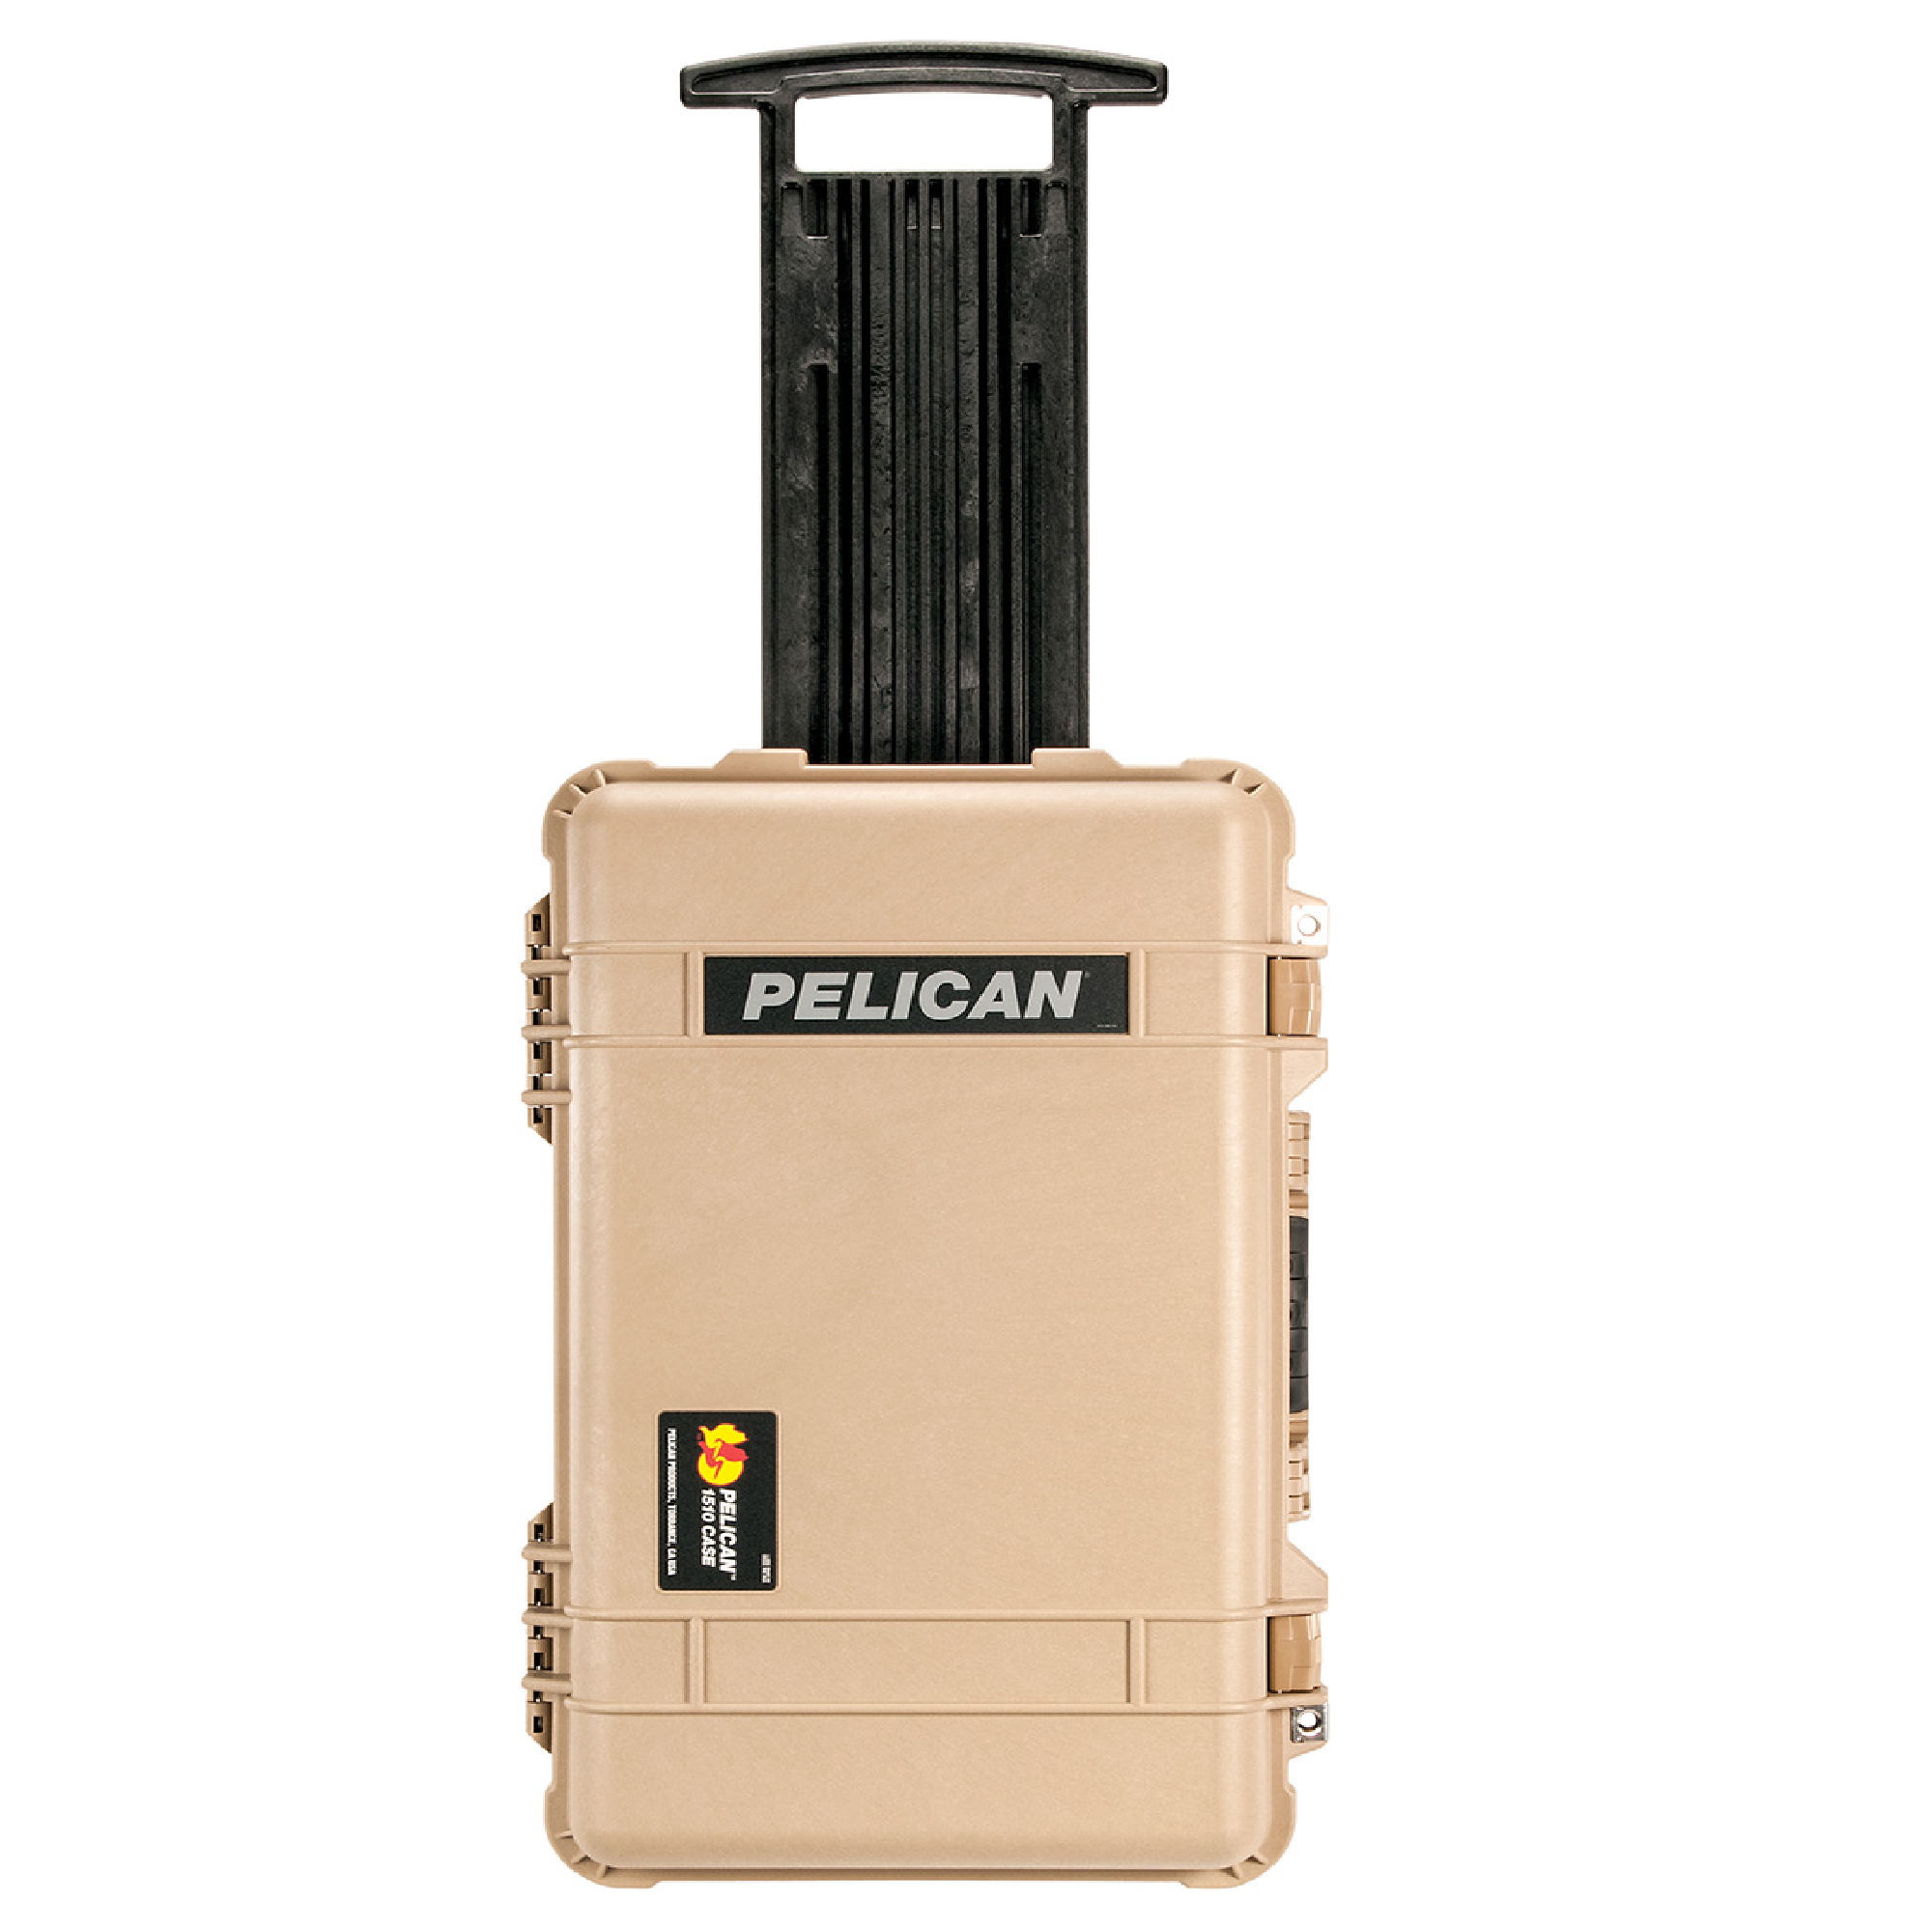 Pelican 1510 Protector Carry-On Case Desert Tan With Internal Foam